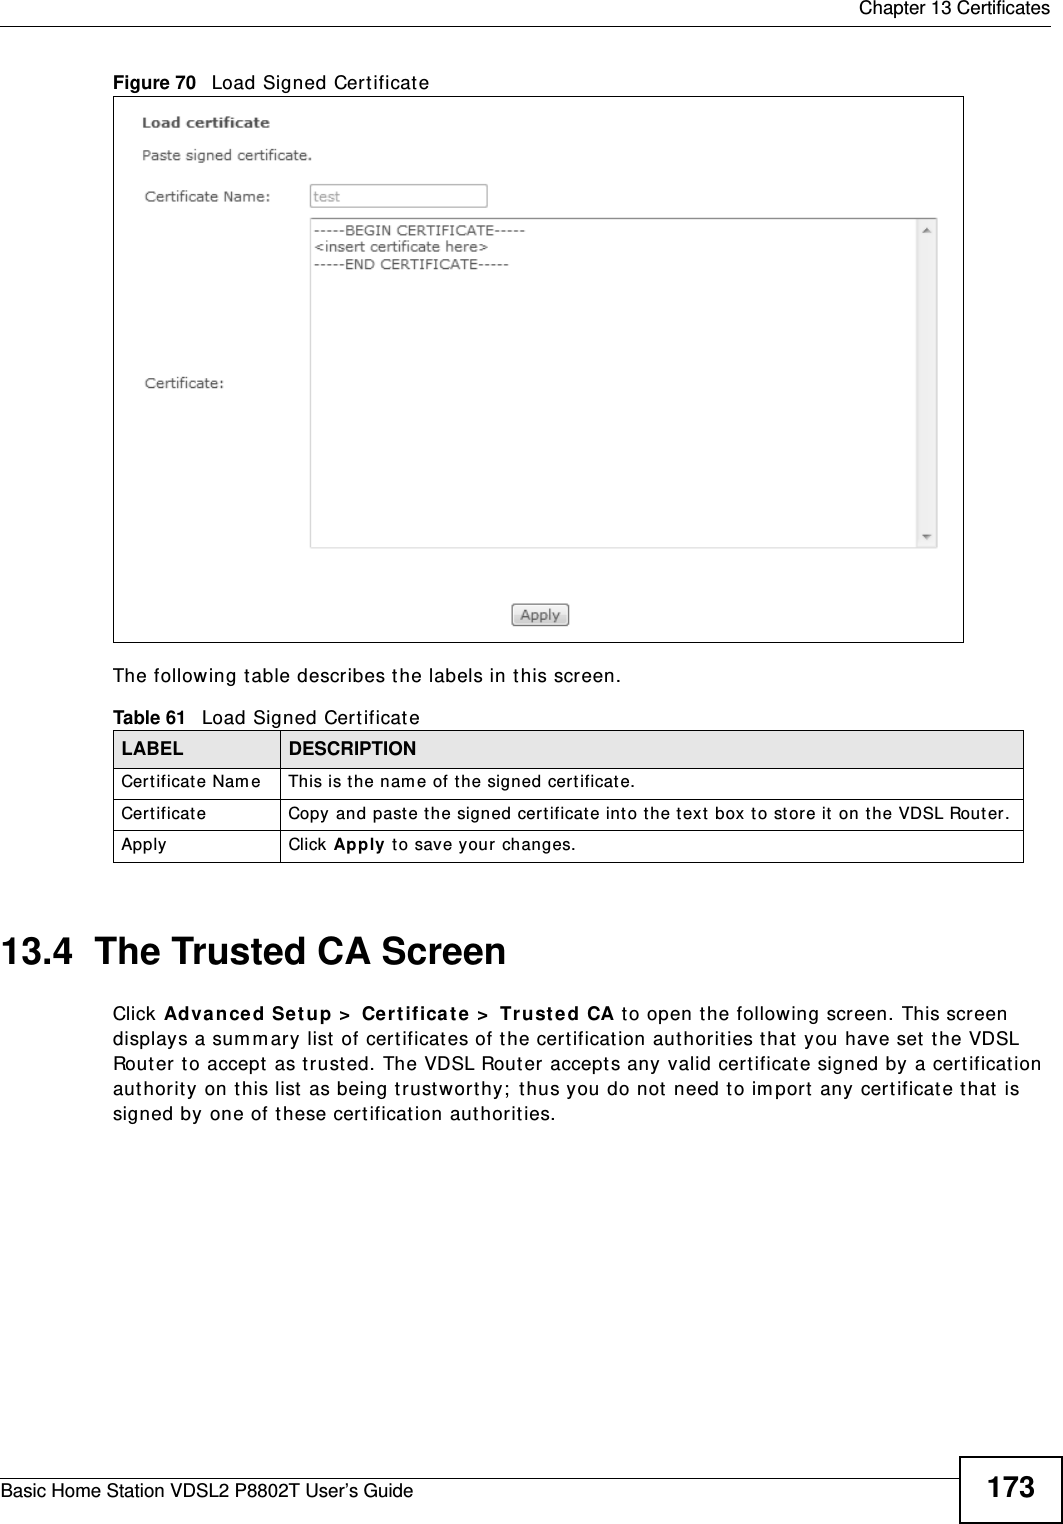  Chapter 13 CertificatesBasic Home Station VDSL2 P8802T User’s Guide 173Figure 70   Load Signed Certificate The following t able describes t he labels in t his screen. 13.4  The Trusted CA ScreenClick Advance d Setup &gt;  Cer tifica t e &gt;  Trust e d CA t o open t he following screen. This screen displays a sum m ary list  of certificat es of t he certificat ion aut horit ies t hat  you have set  the VDSL Router to accept  as t rust ed. The VDSL Router accepts any valid certificat e signed by a certificat ion aut horit y on t his list  as being trust wort hy;  thus you do not need to im port  any certificat e t hat  is signed by one of these certification aut horit ies. Table 61   Load Signed CertificateLABEL DESCRIPTIONCert ificate Nam e This is t he nam e of the signed cert ificat e. Cert ificat e Copy and past e the signed cert ificat e int o the text  box t o st ore it  on the VDSL Rout er.Apply Click Apply to save your changes.